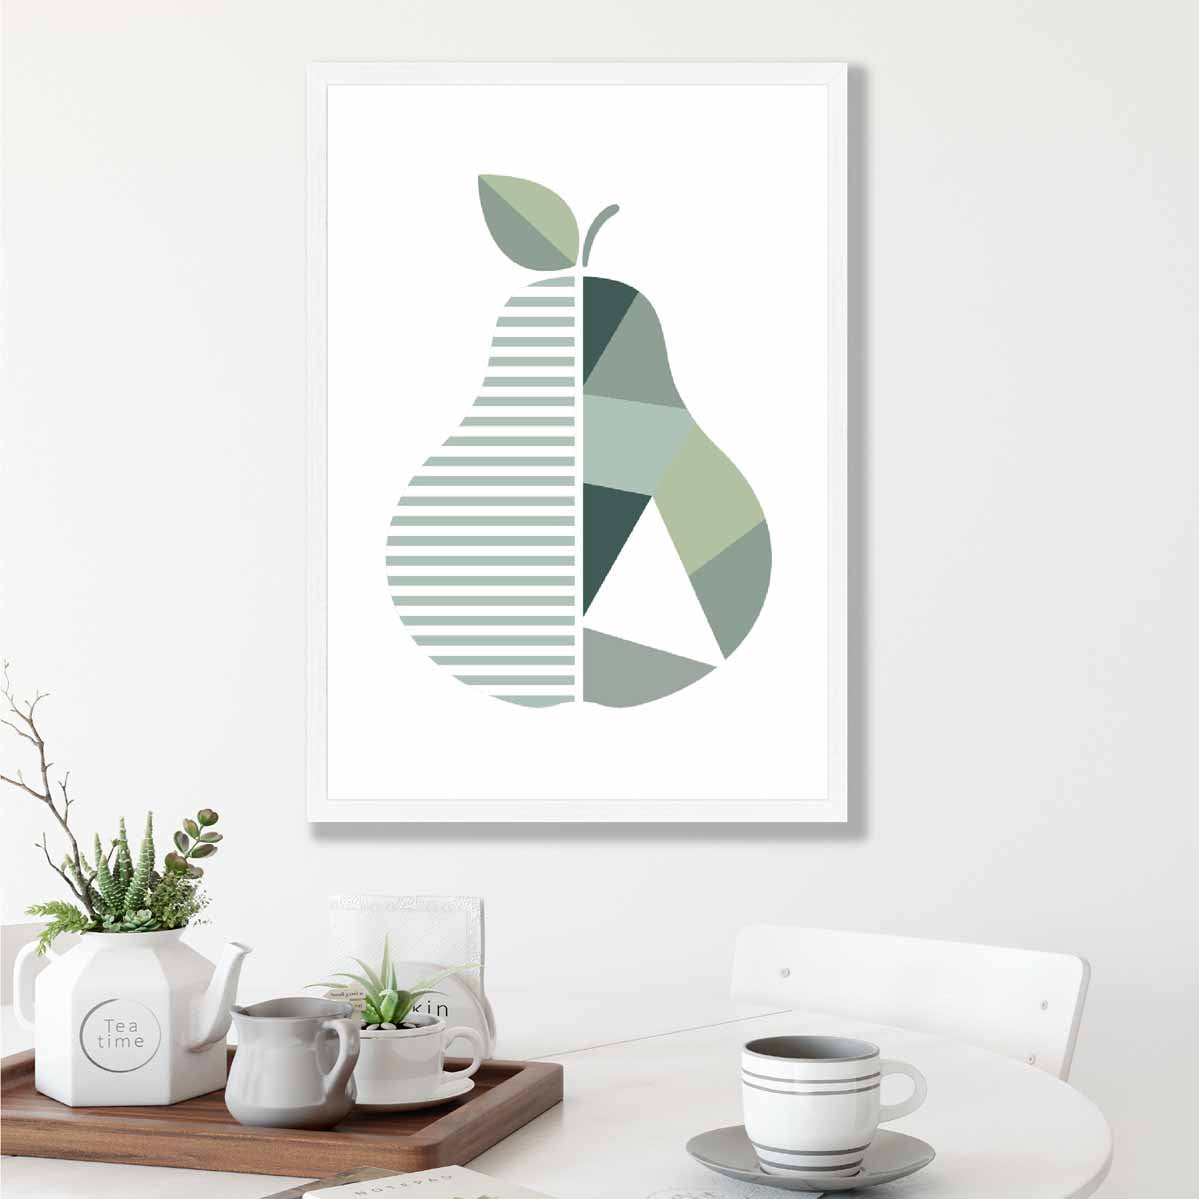 Geometric Fruit Poster of Pear in Sage green